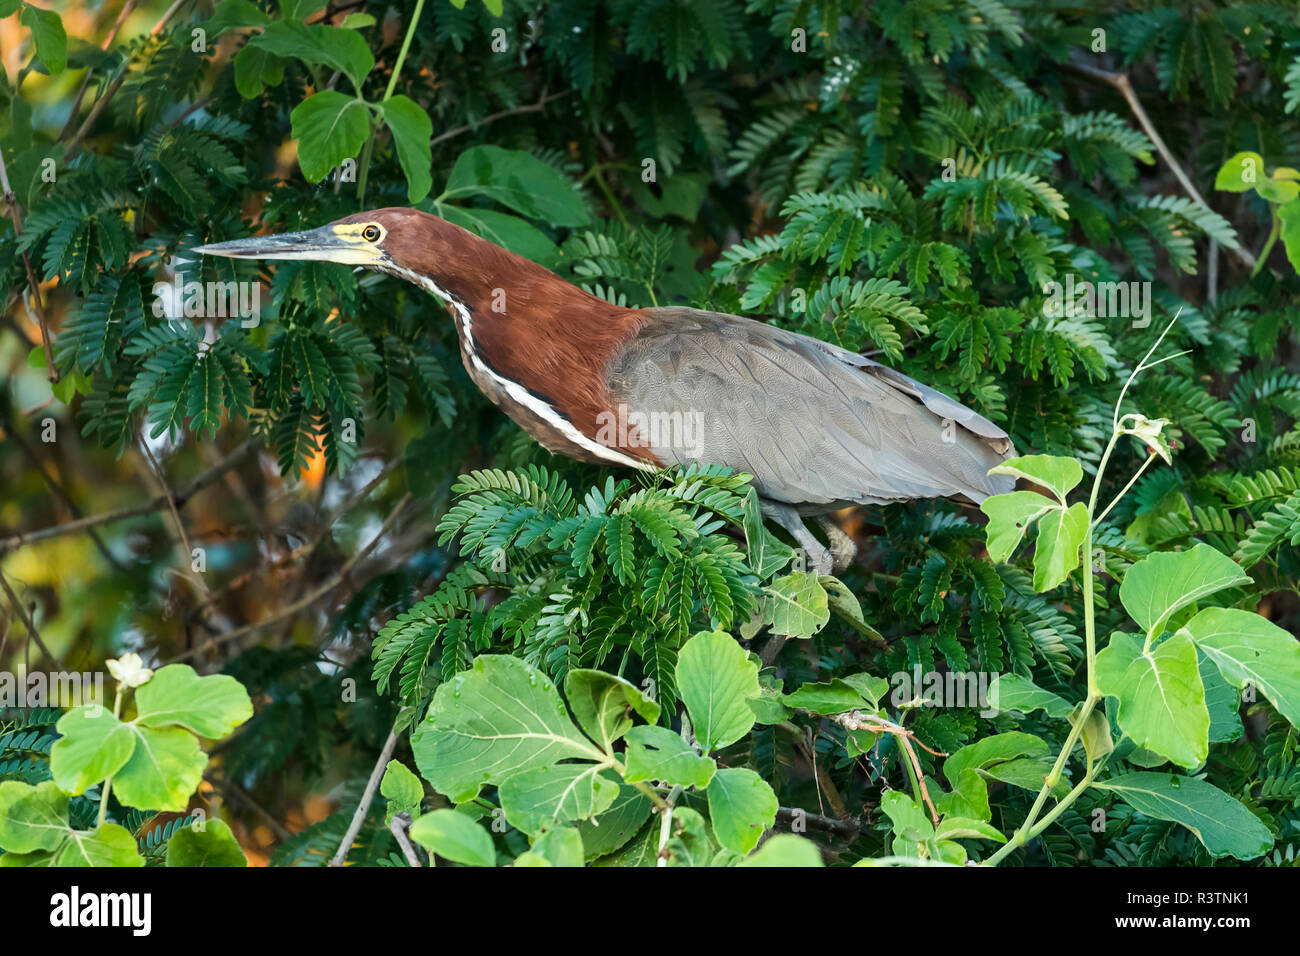 Brazil, The Pantanal. A Rufescent tiger heron adult sits in the branches of a tree. Stock Photo